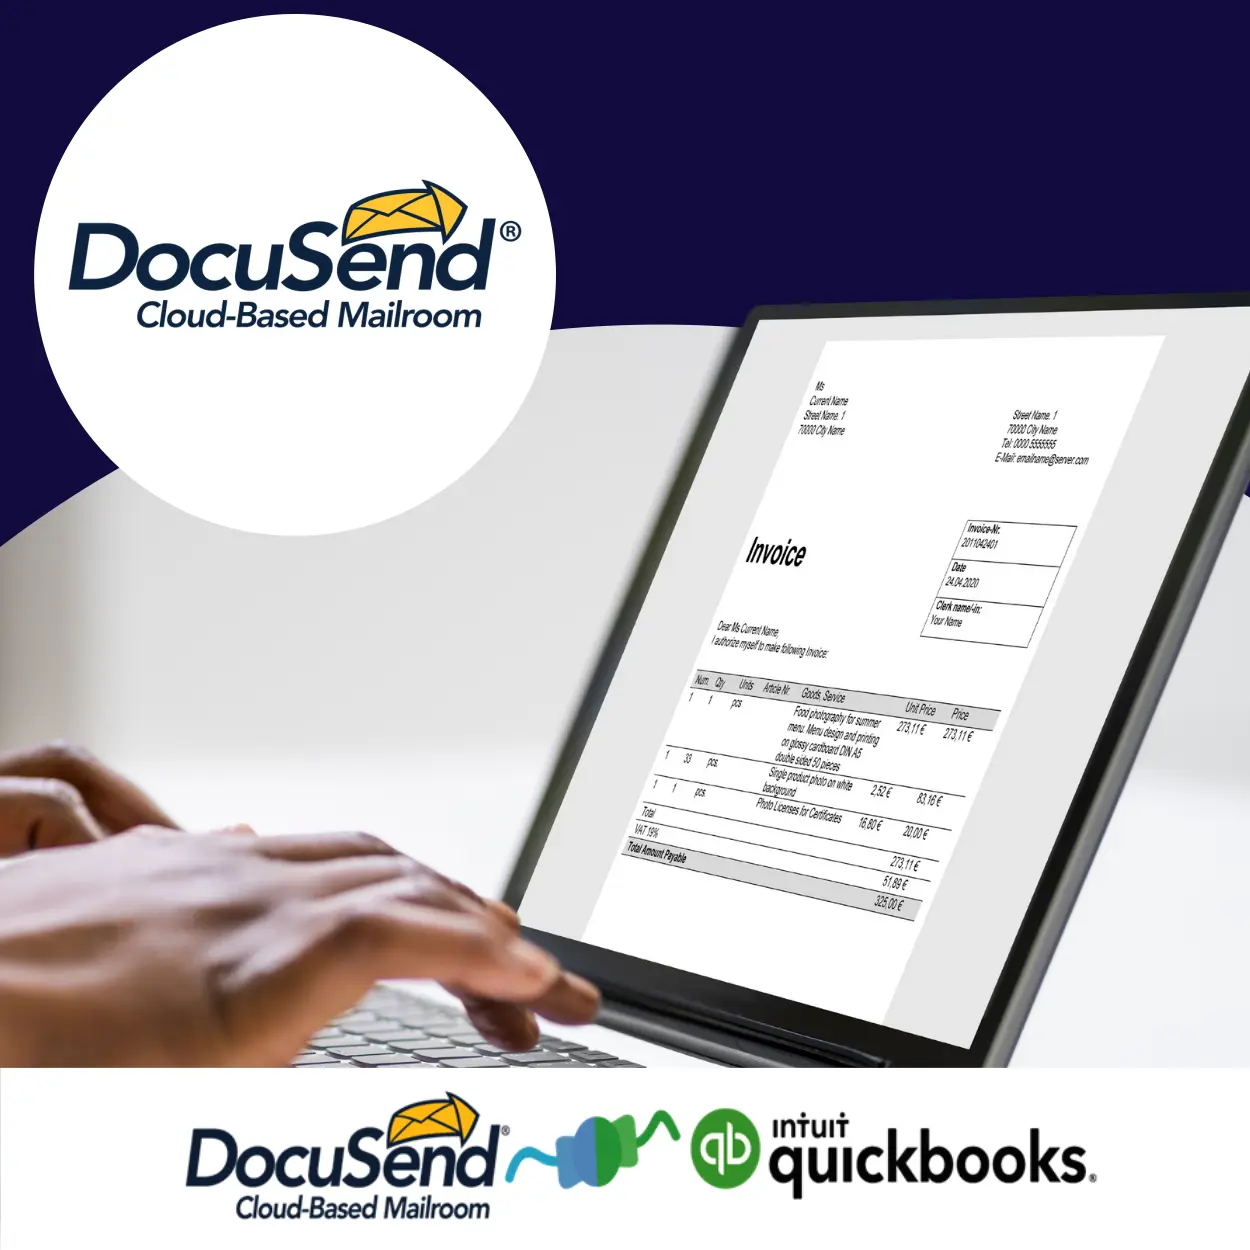 How to print and mail quickbooks invoices